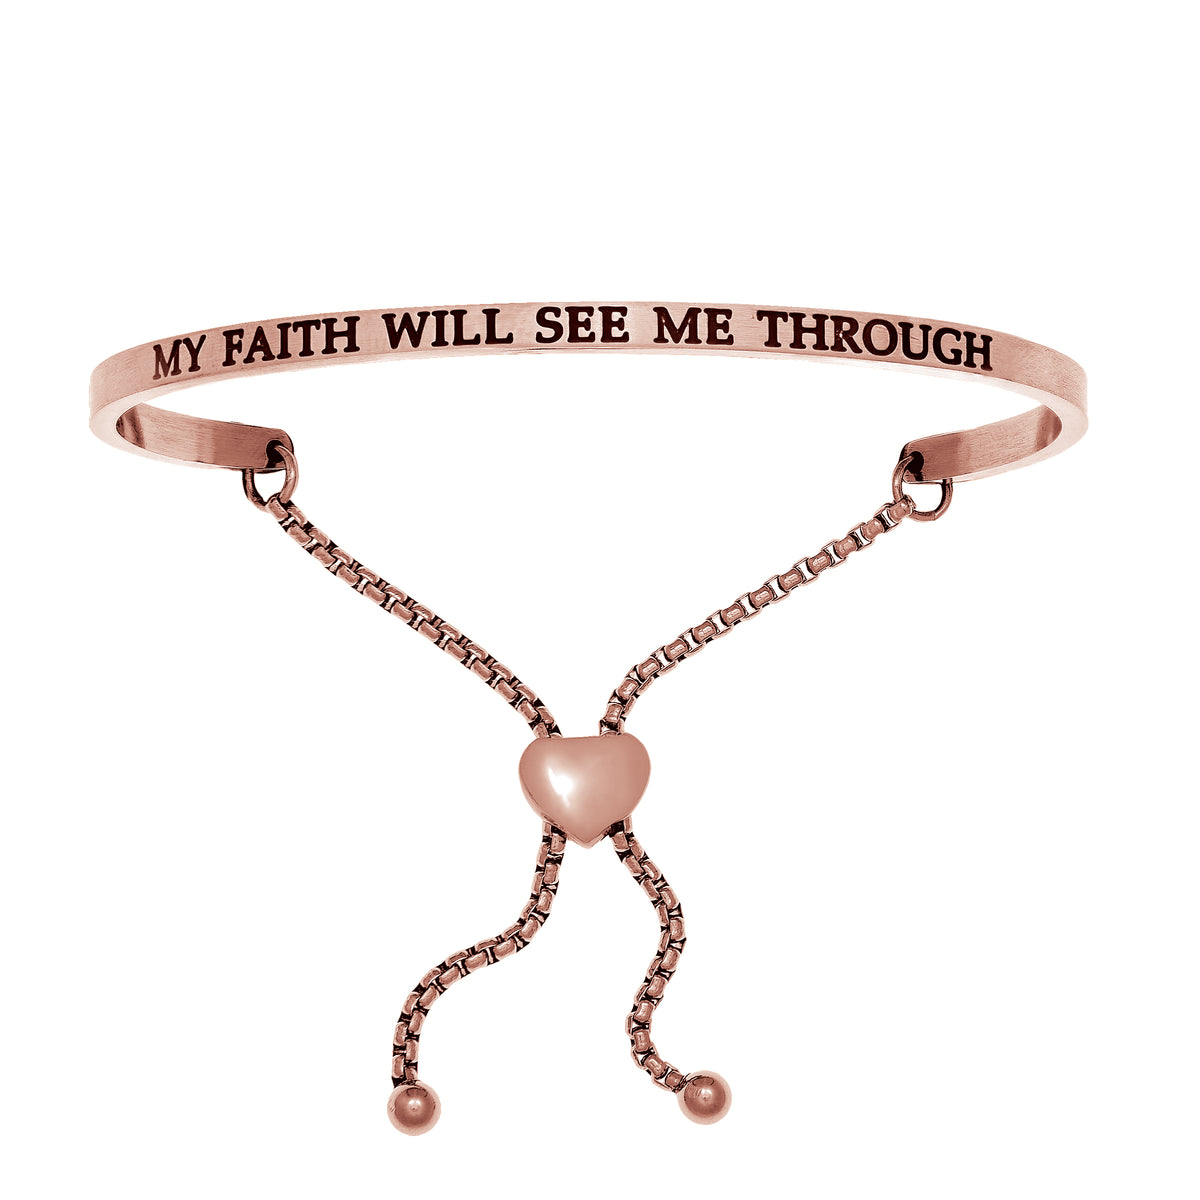 Intuitions Stainless Steel My Faith Will See Me Through Bangle Bracelet